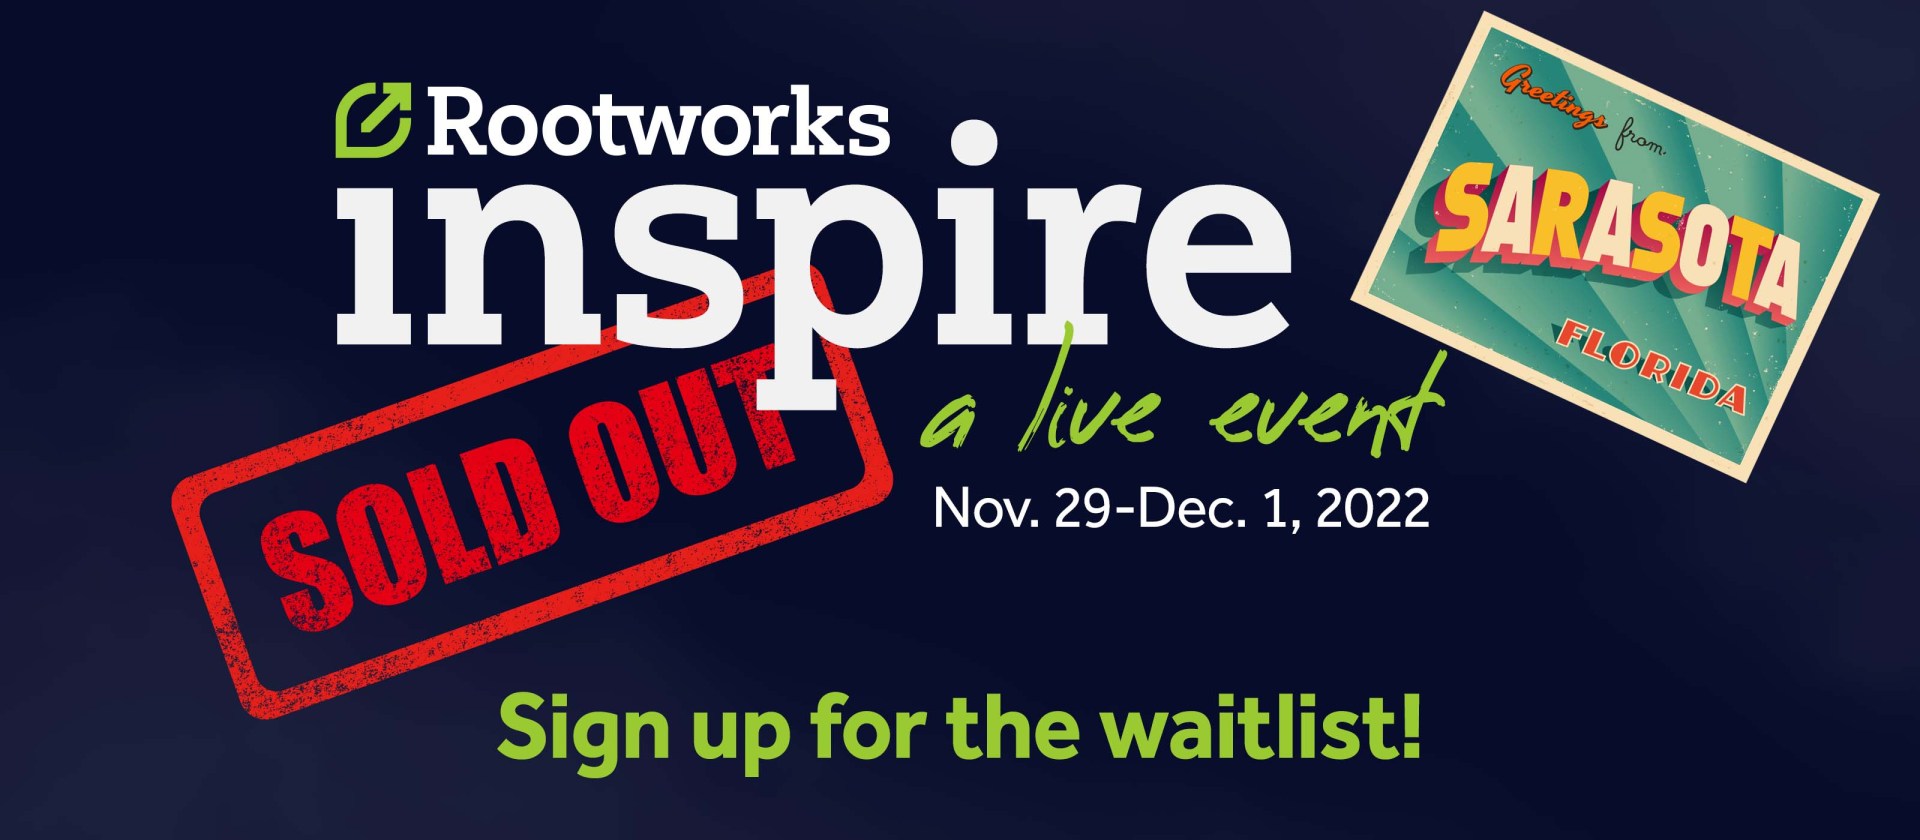 Rootworks inspire: a live event. Nov. 29 - Dec. 1, 2022. Sold out. Sign up for the waitlist!